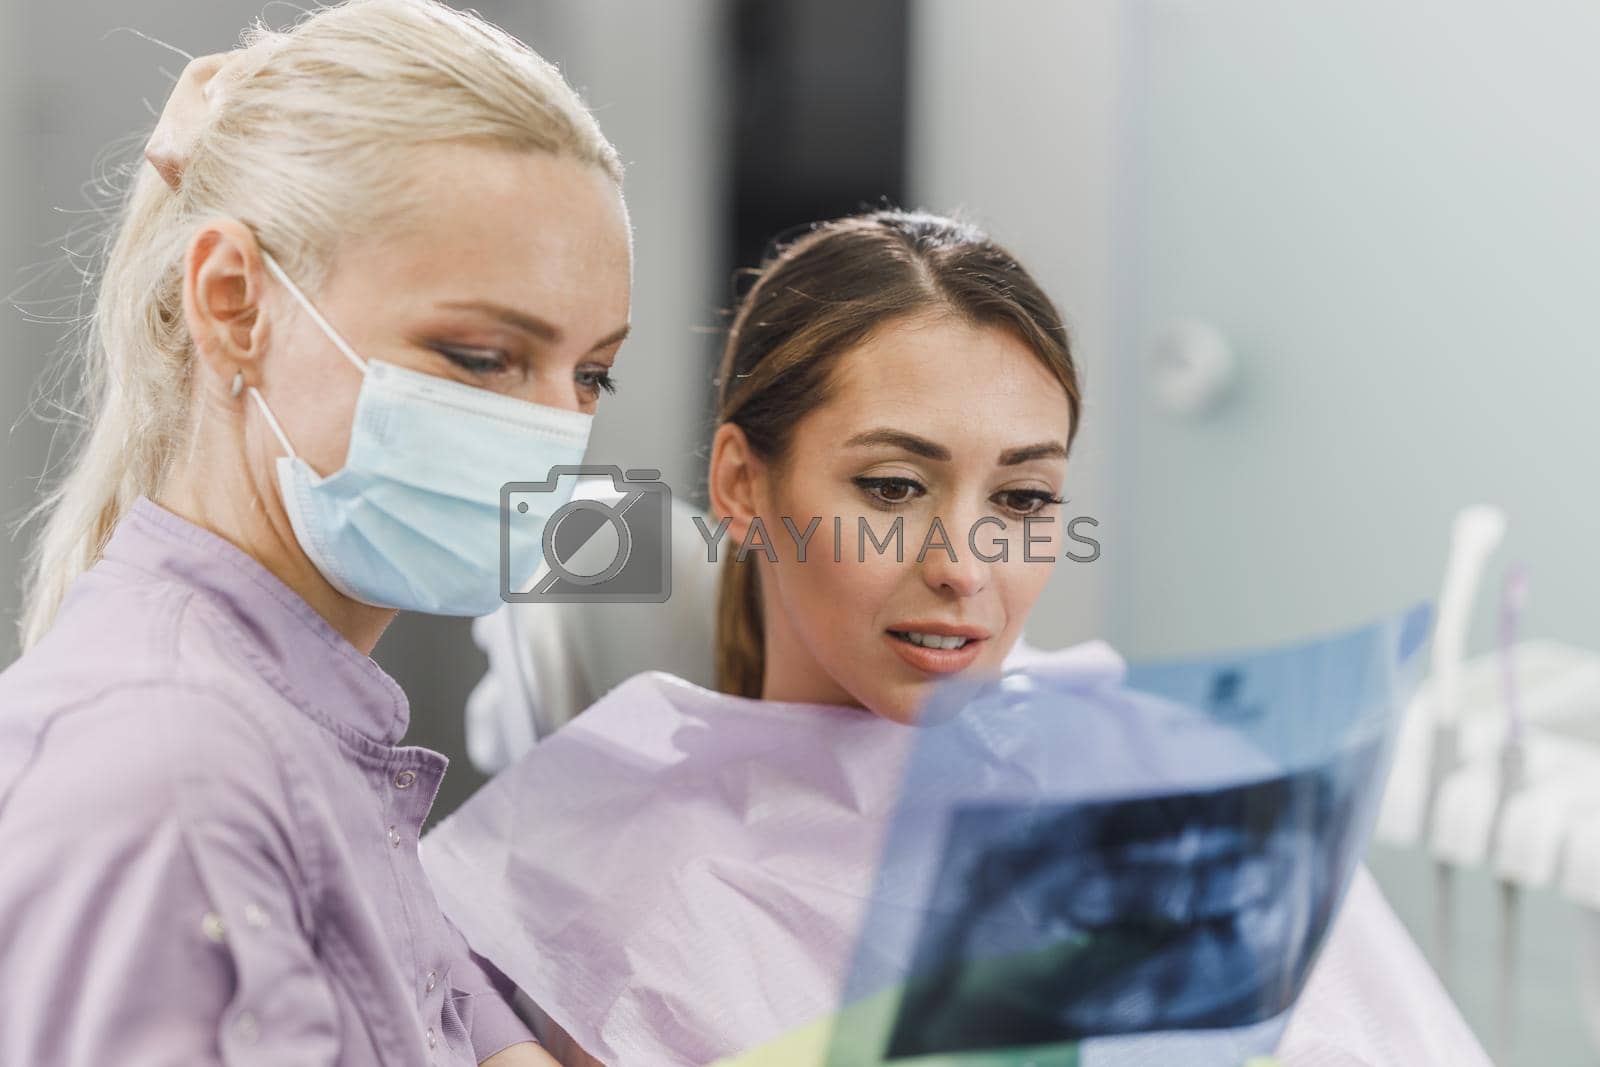 A young dentist and her female patient looking at orthopantomogram during dental appointment.